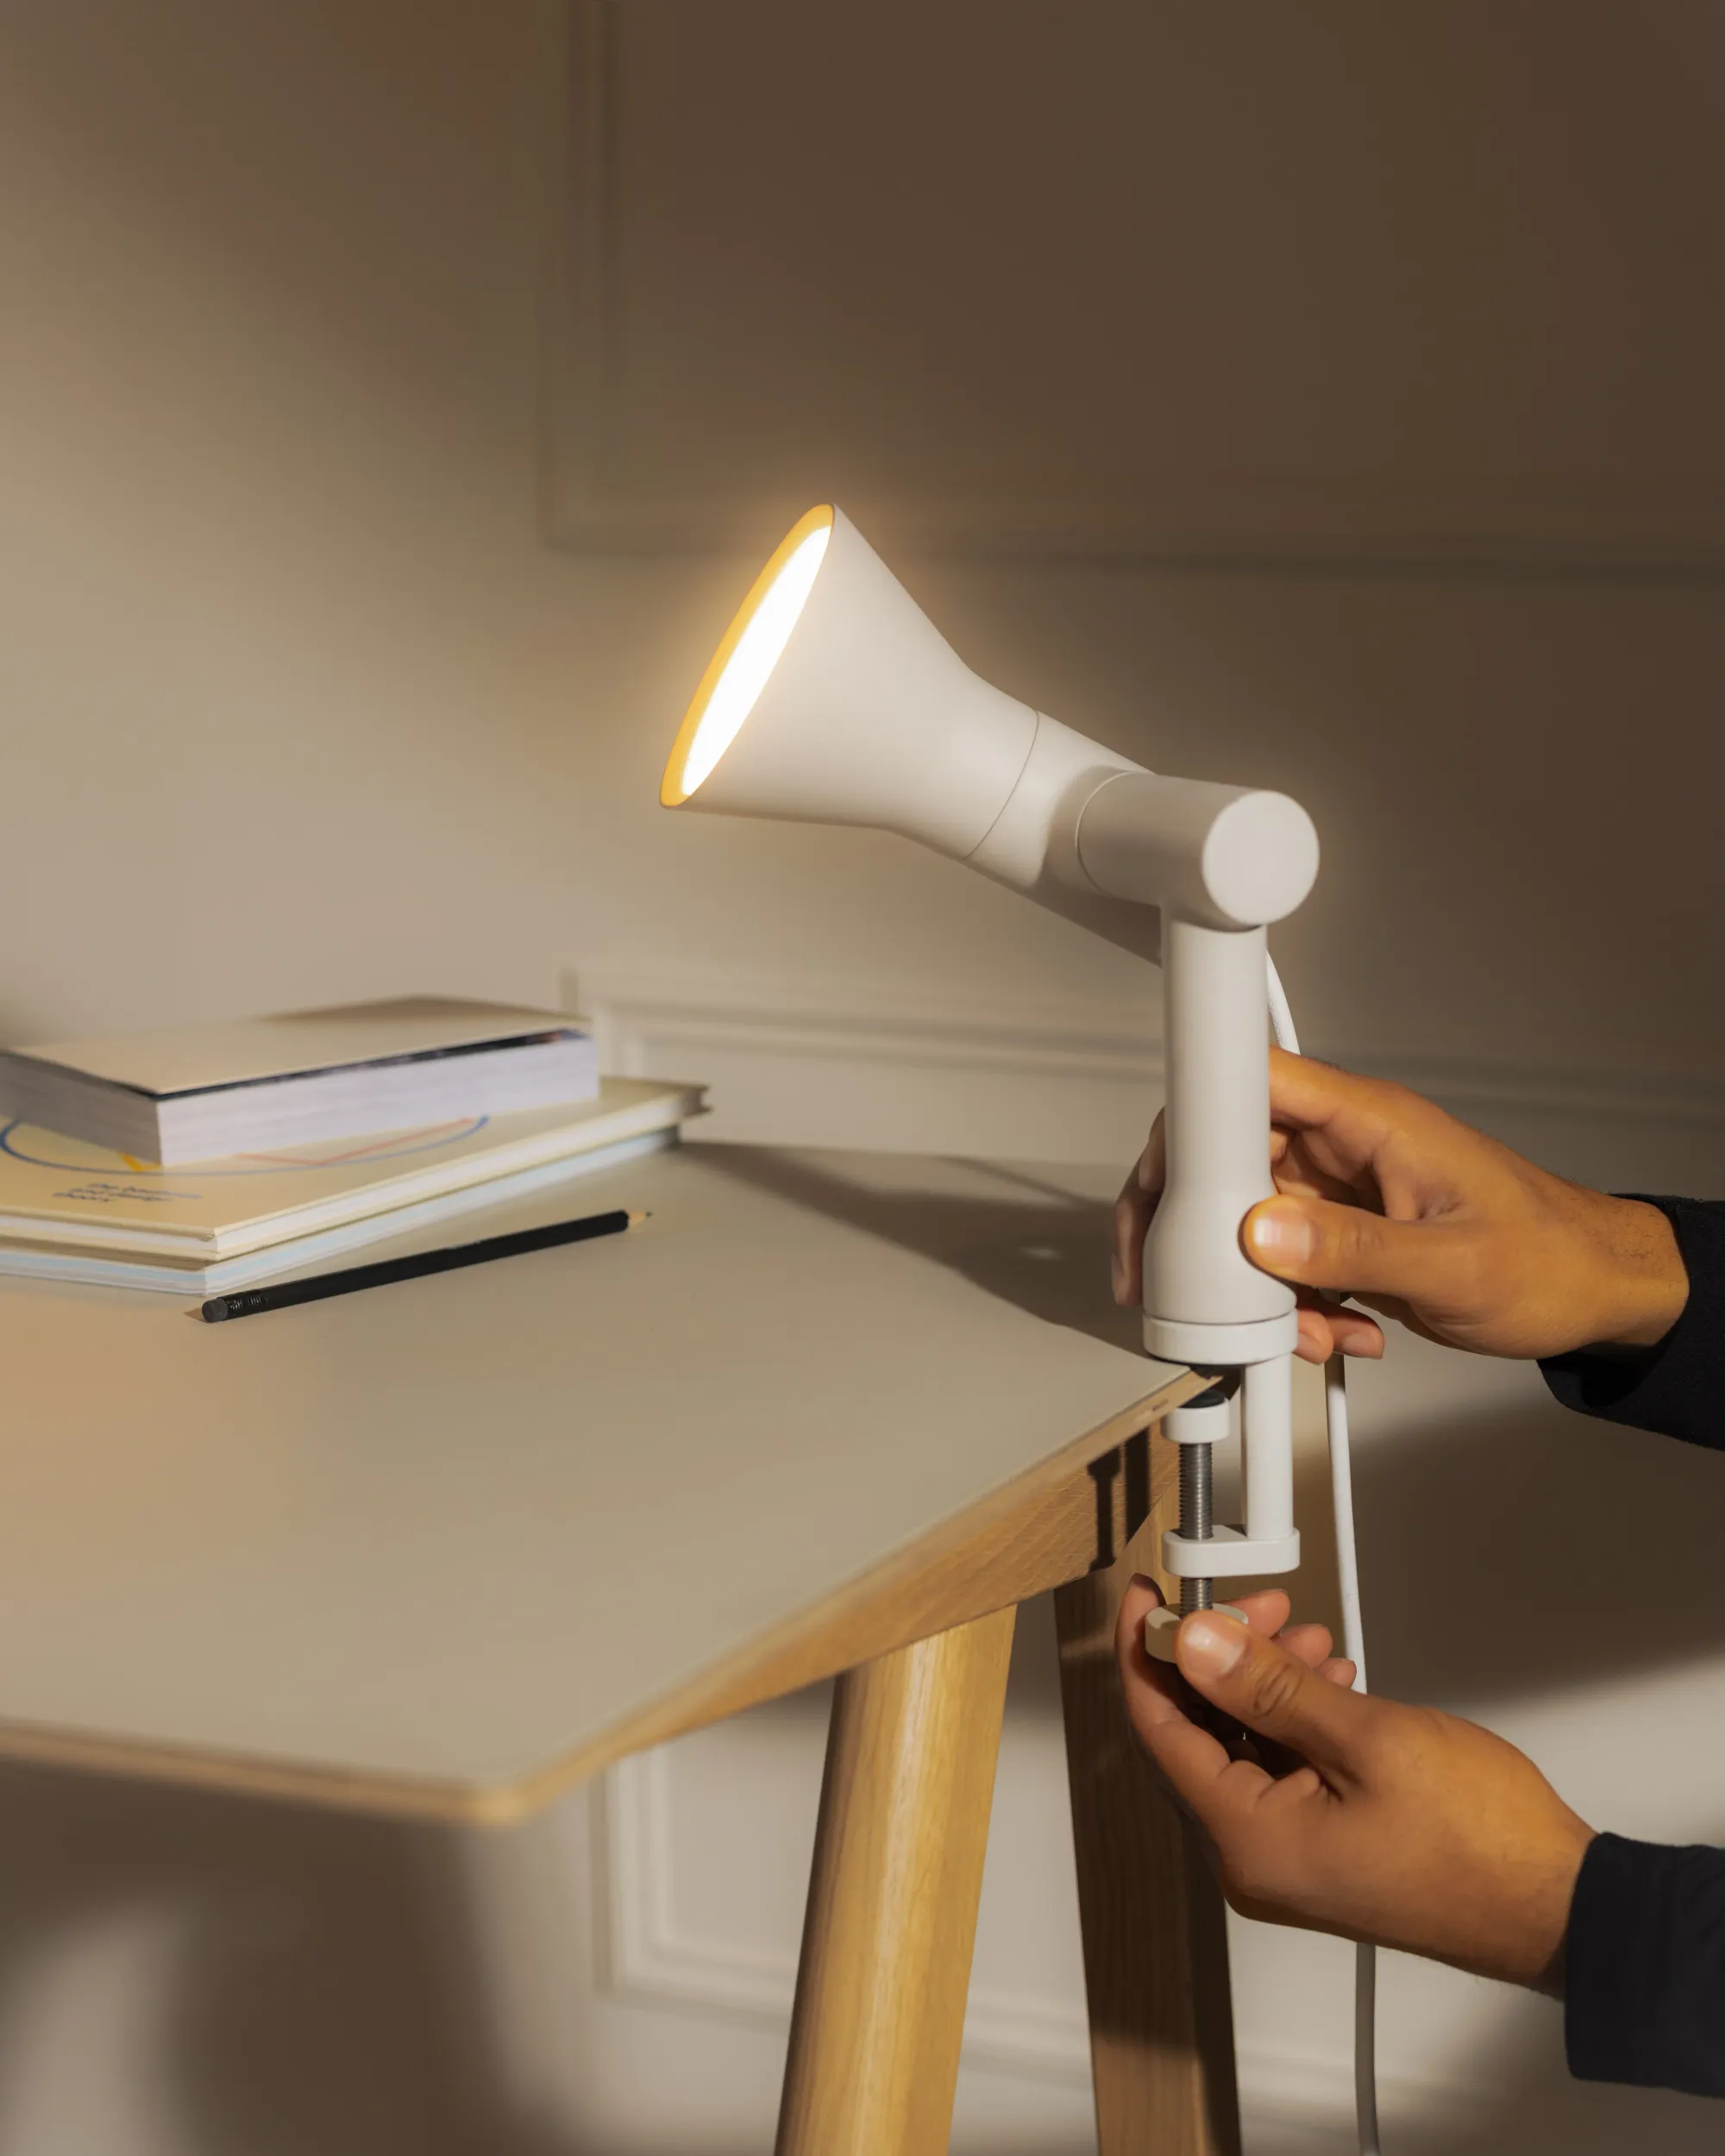 An illuminated Gallery Clamp Light by Gantri is being fastened on a home office table